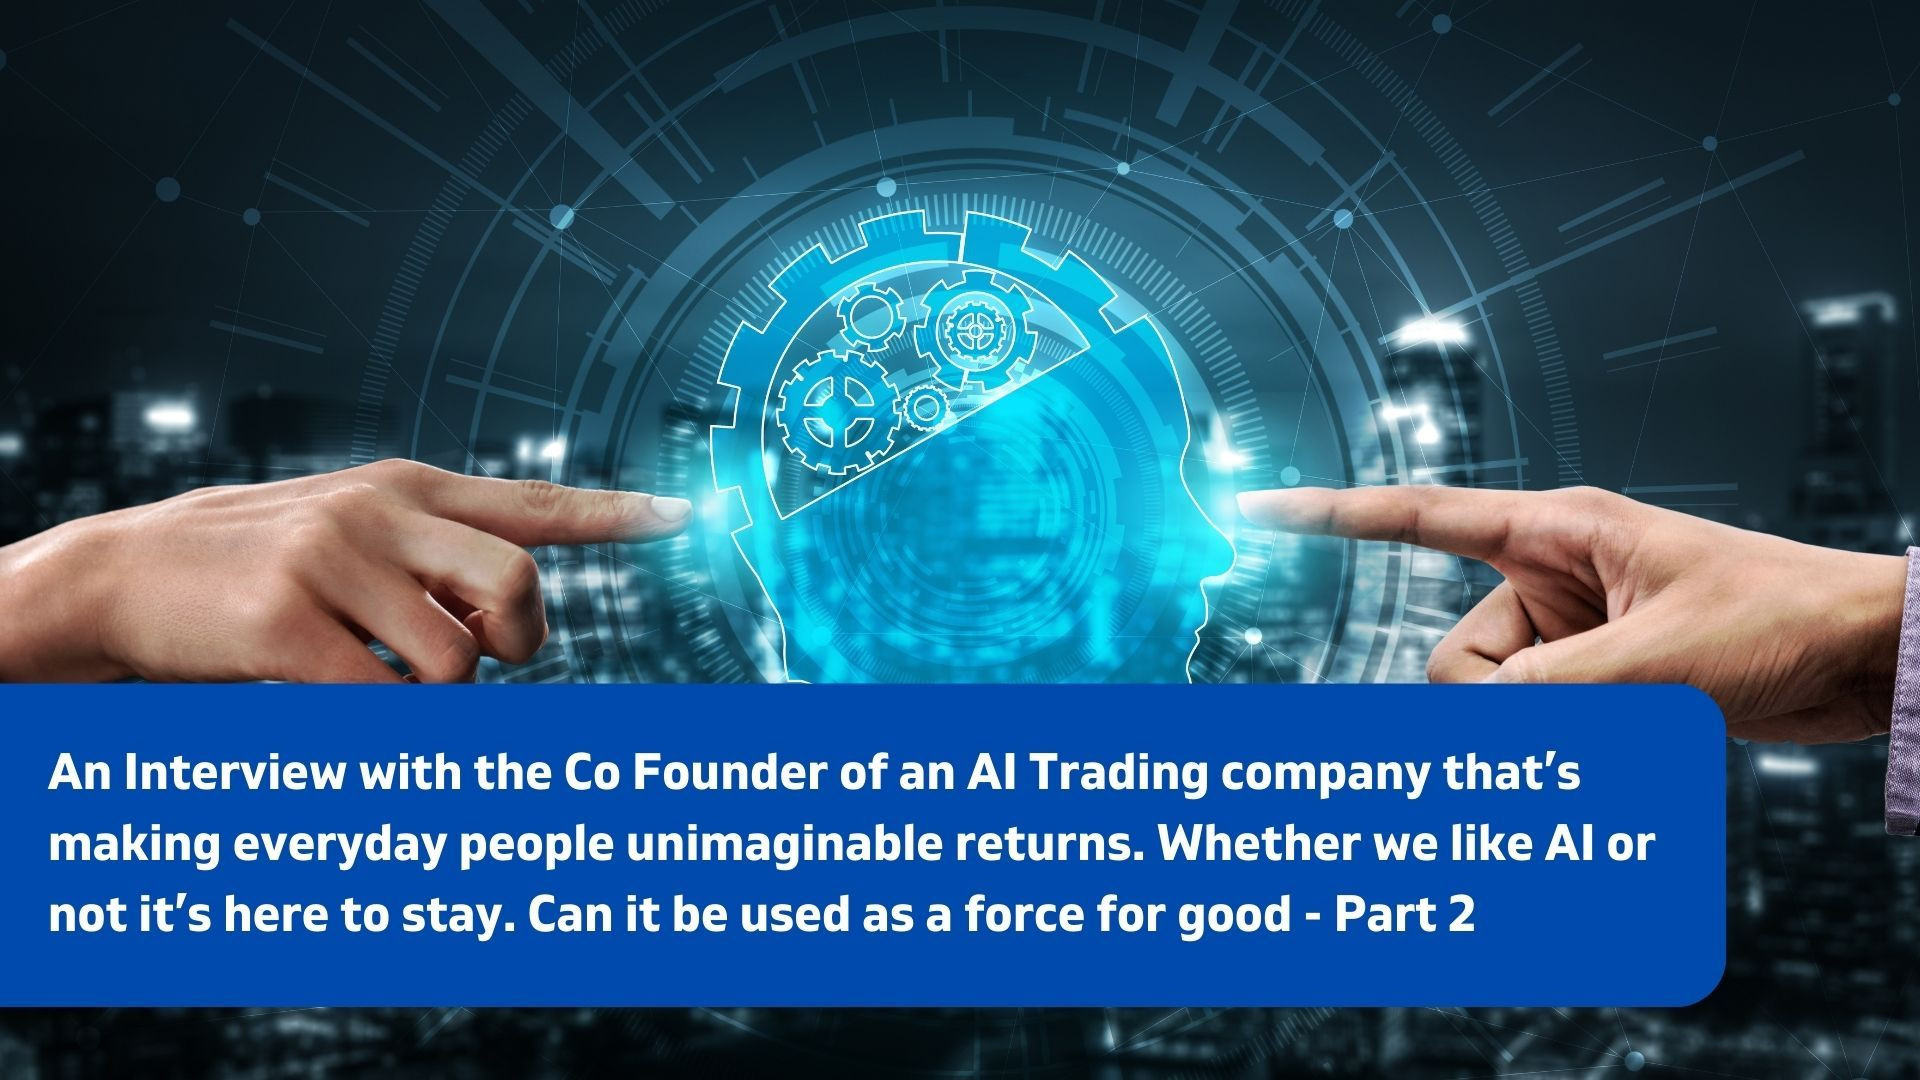 ⁣Jamie interviews the Co Founder of an AI Trading company that’s making everyday people unimaginable